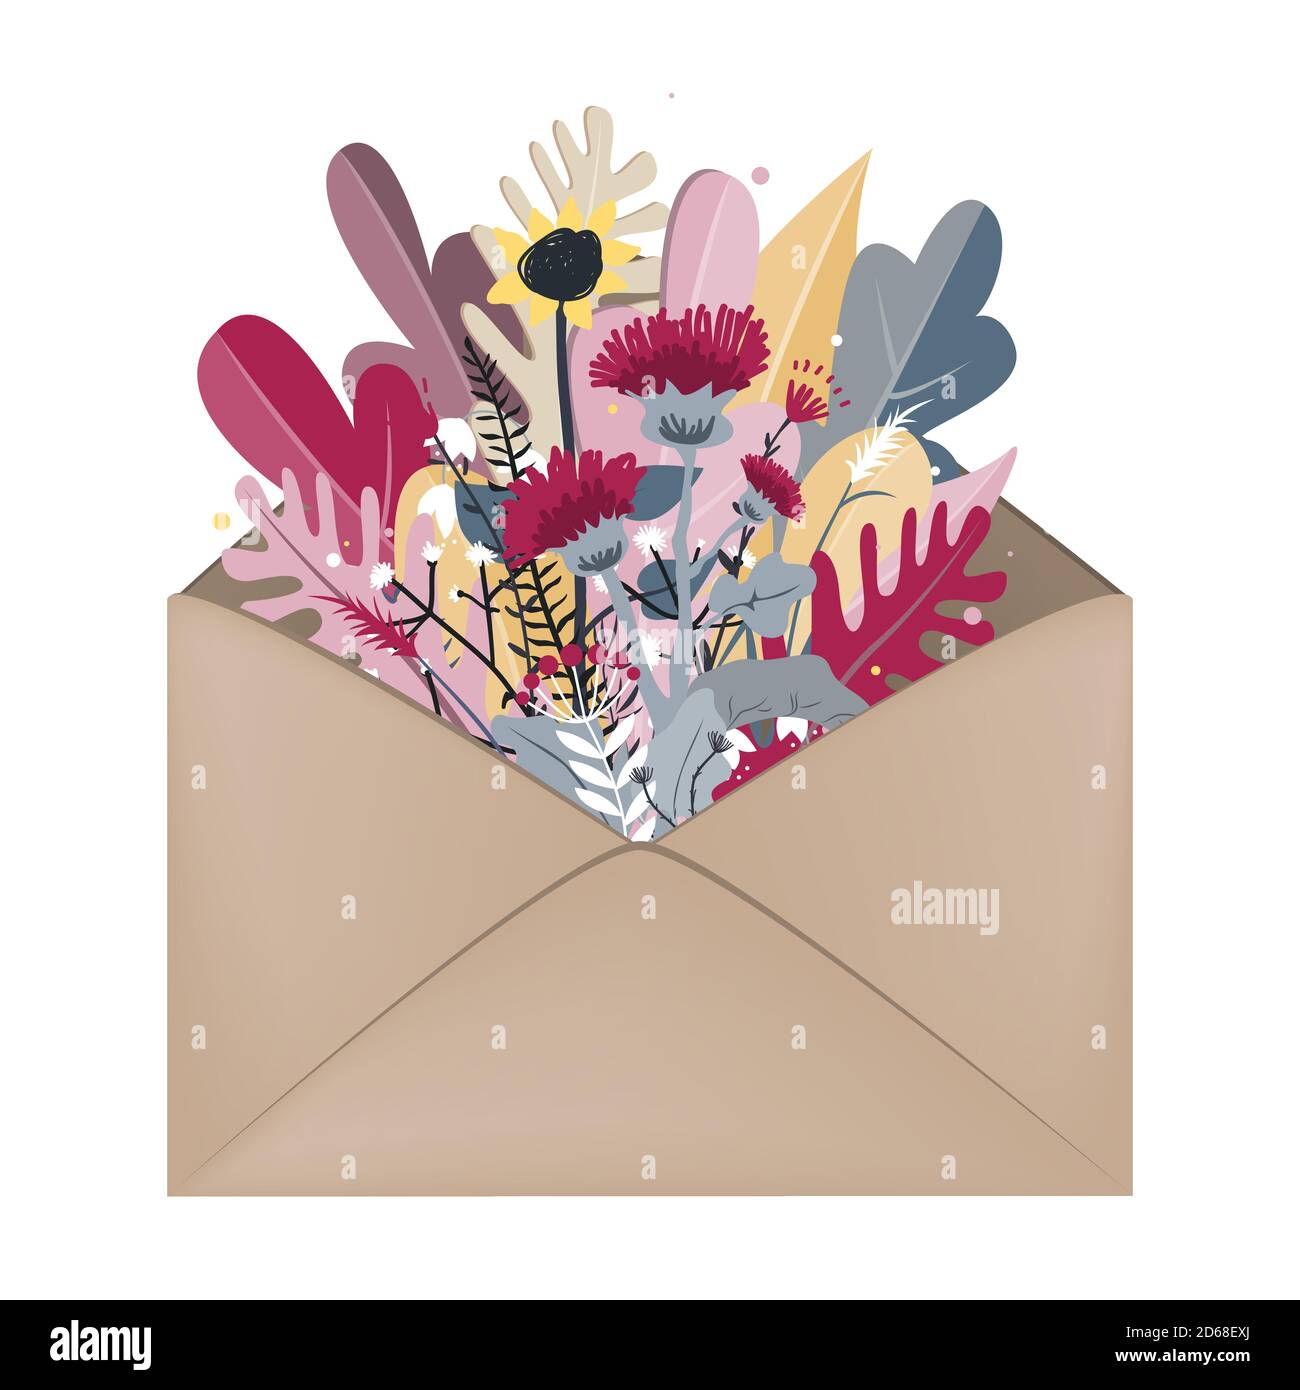 Envelope with autumn bouquet inside. Hello autumn concept. Vintage postcard with doodle hand drawn autumn leaves. Vector illustration. Stock Vector